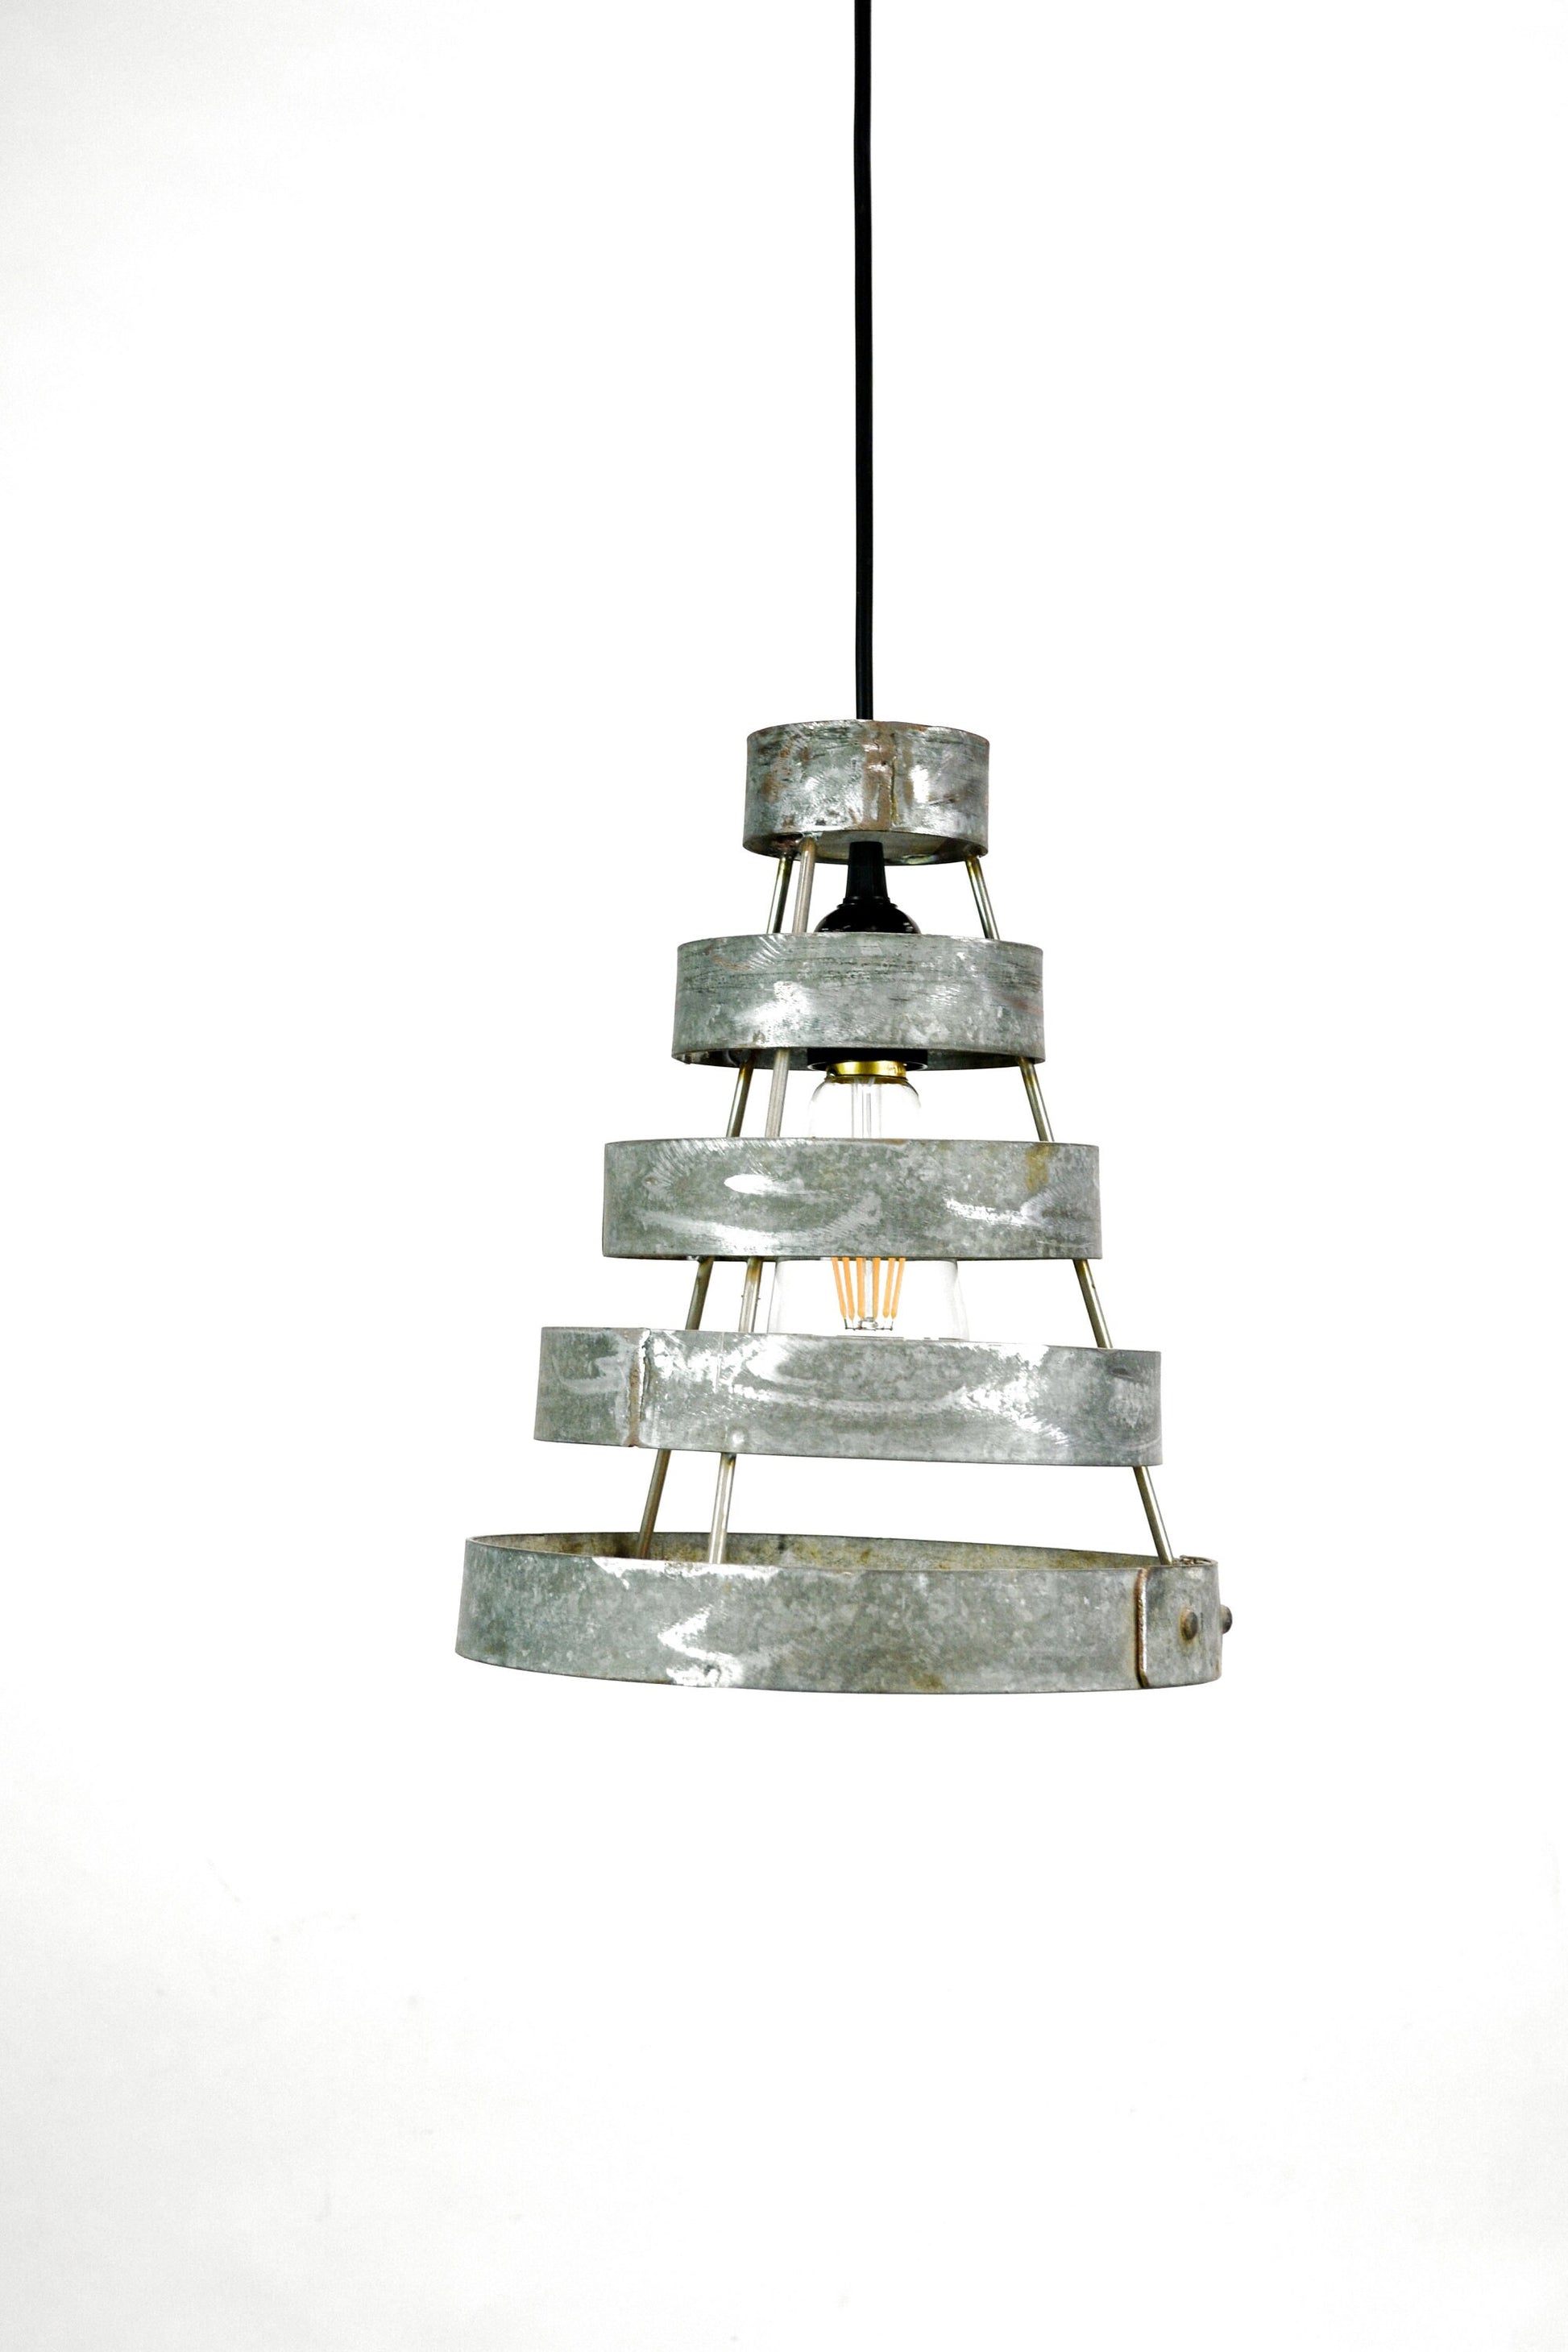 Wine Barrel Ring Pendant Light - Keila - Made from retired California wine barrel rings - 100% Recycled!